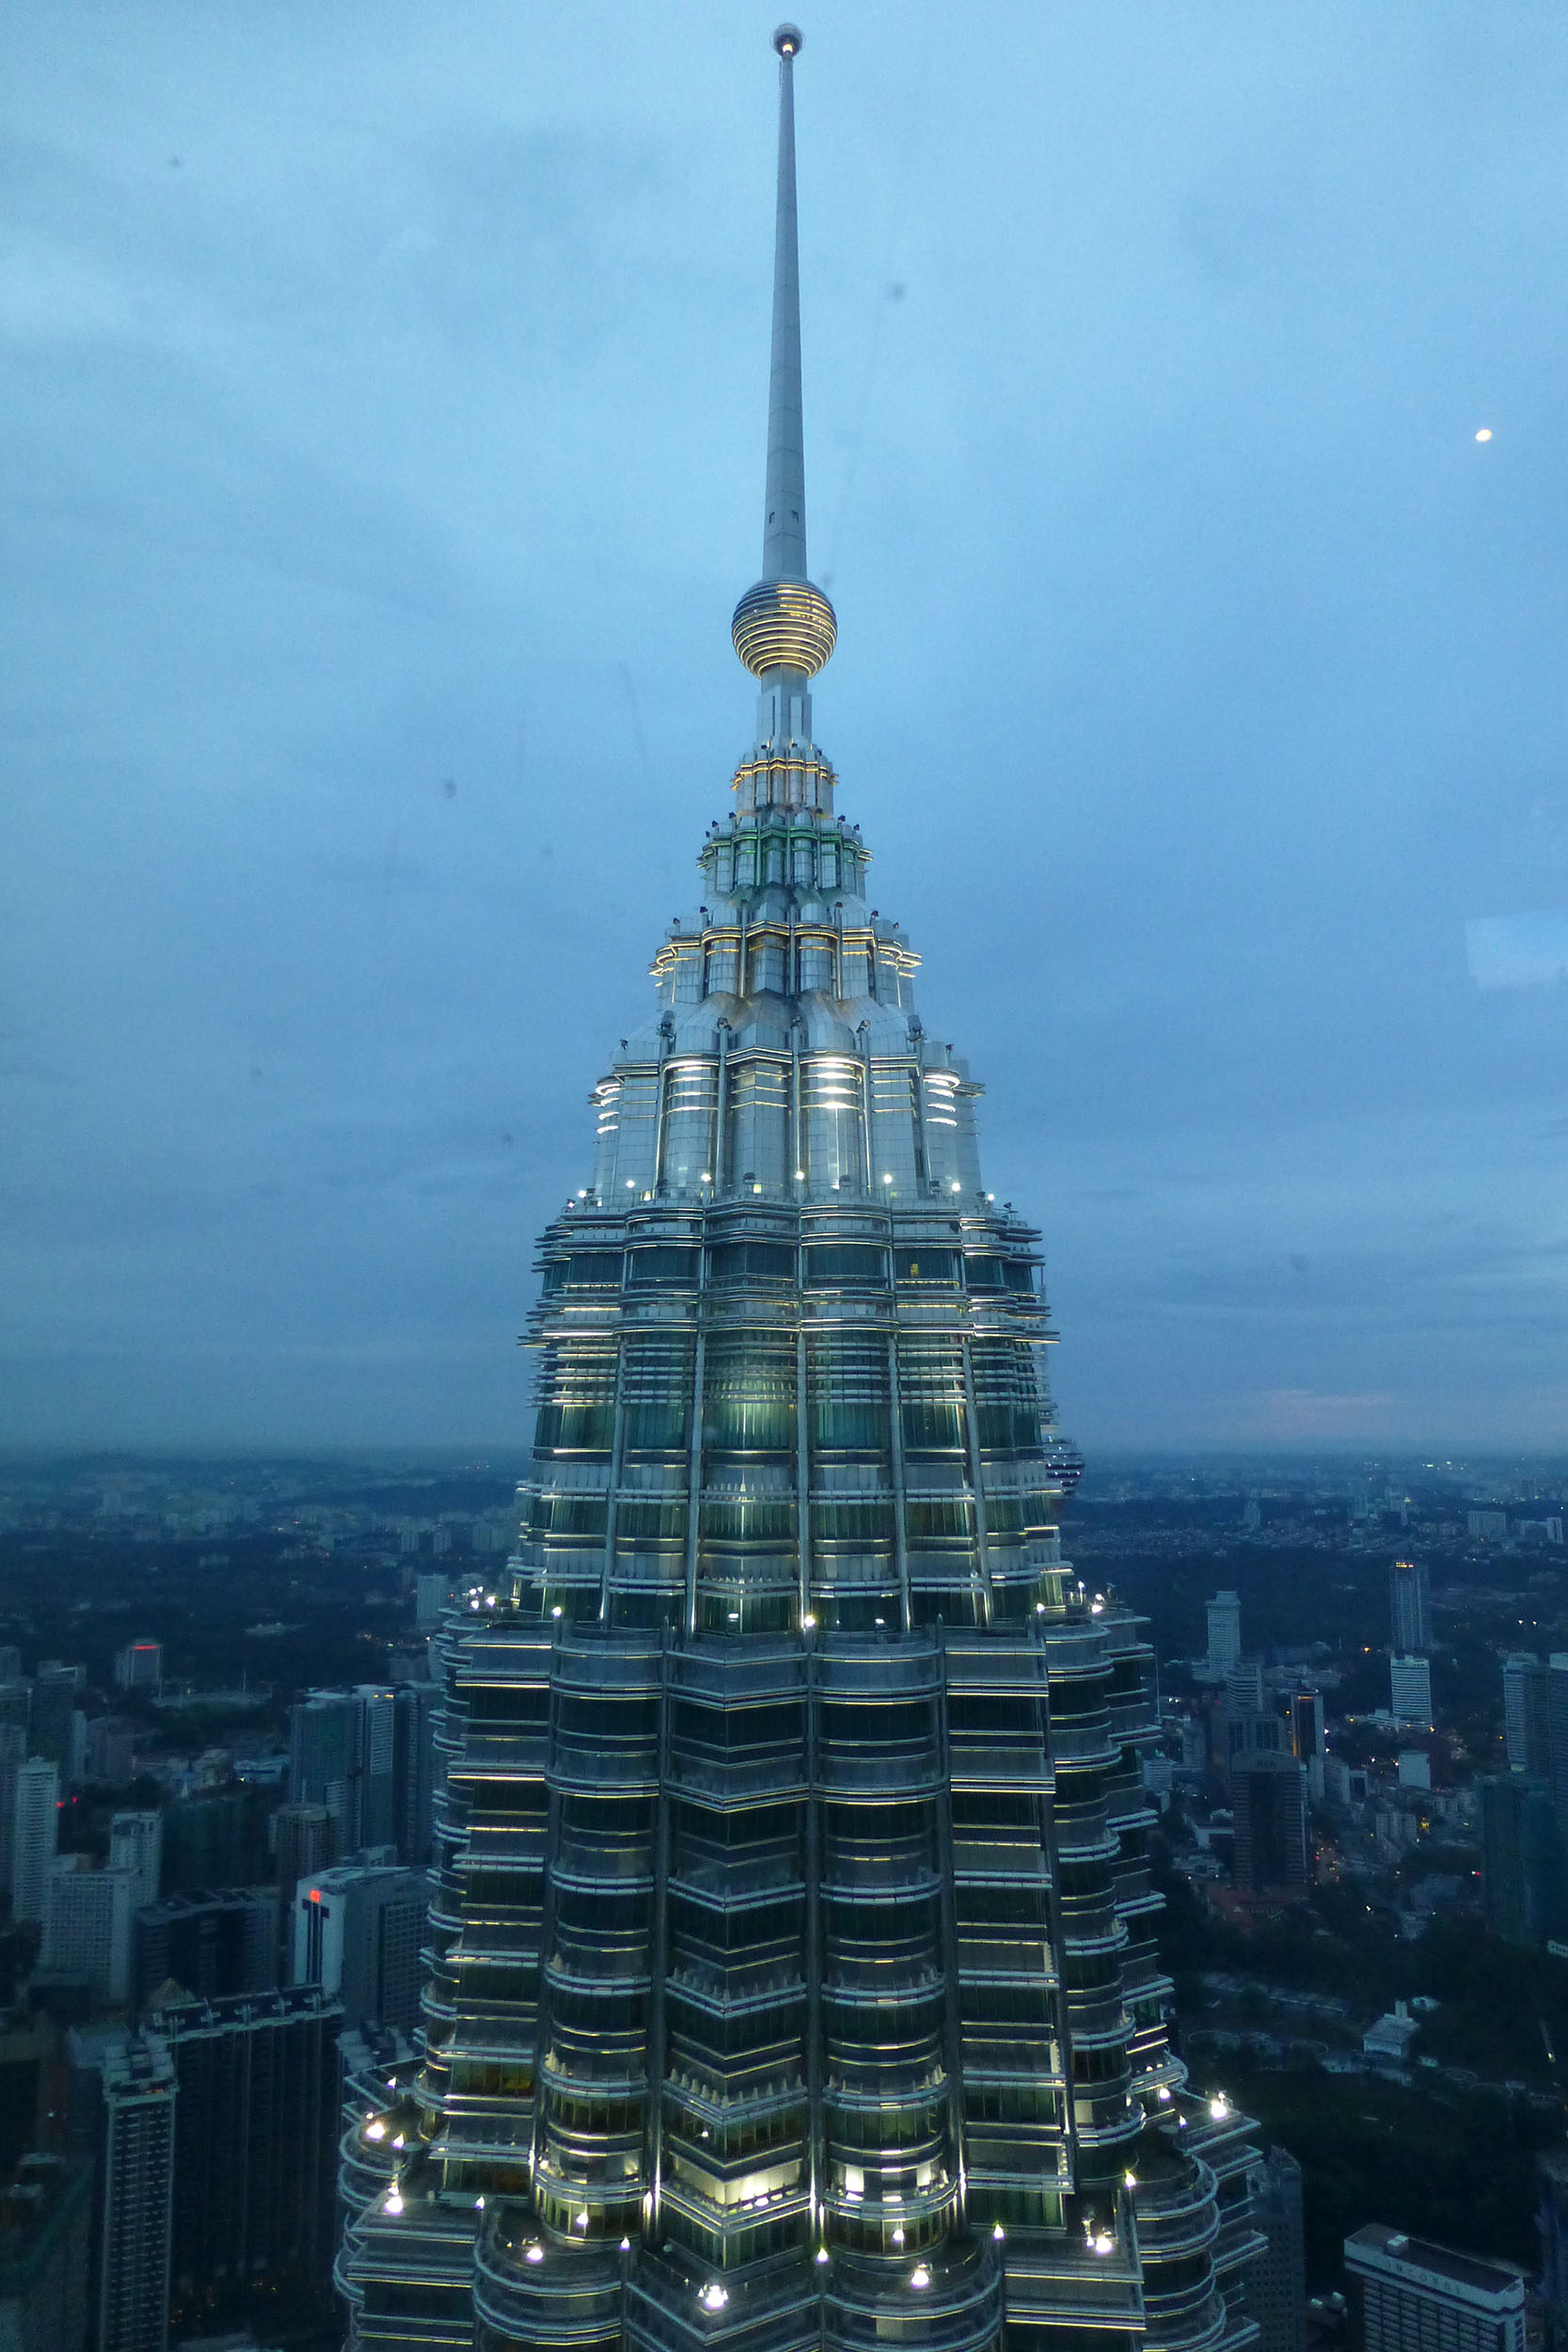 One of the Petronas Towers from the Observation Deck of the other at dusk in Kuala Lumpur Malaysia